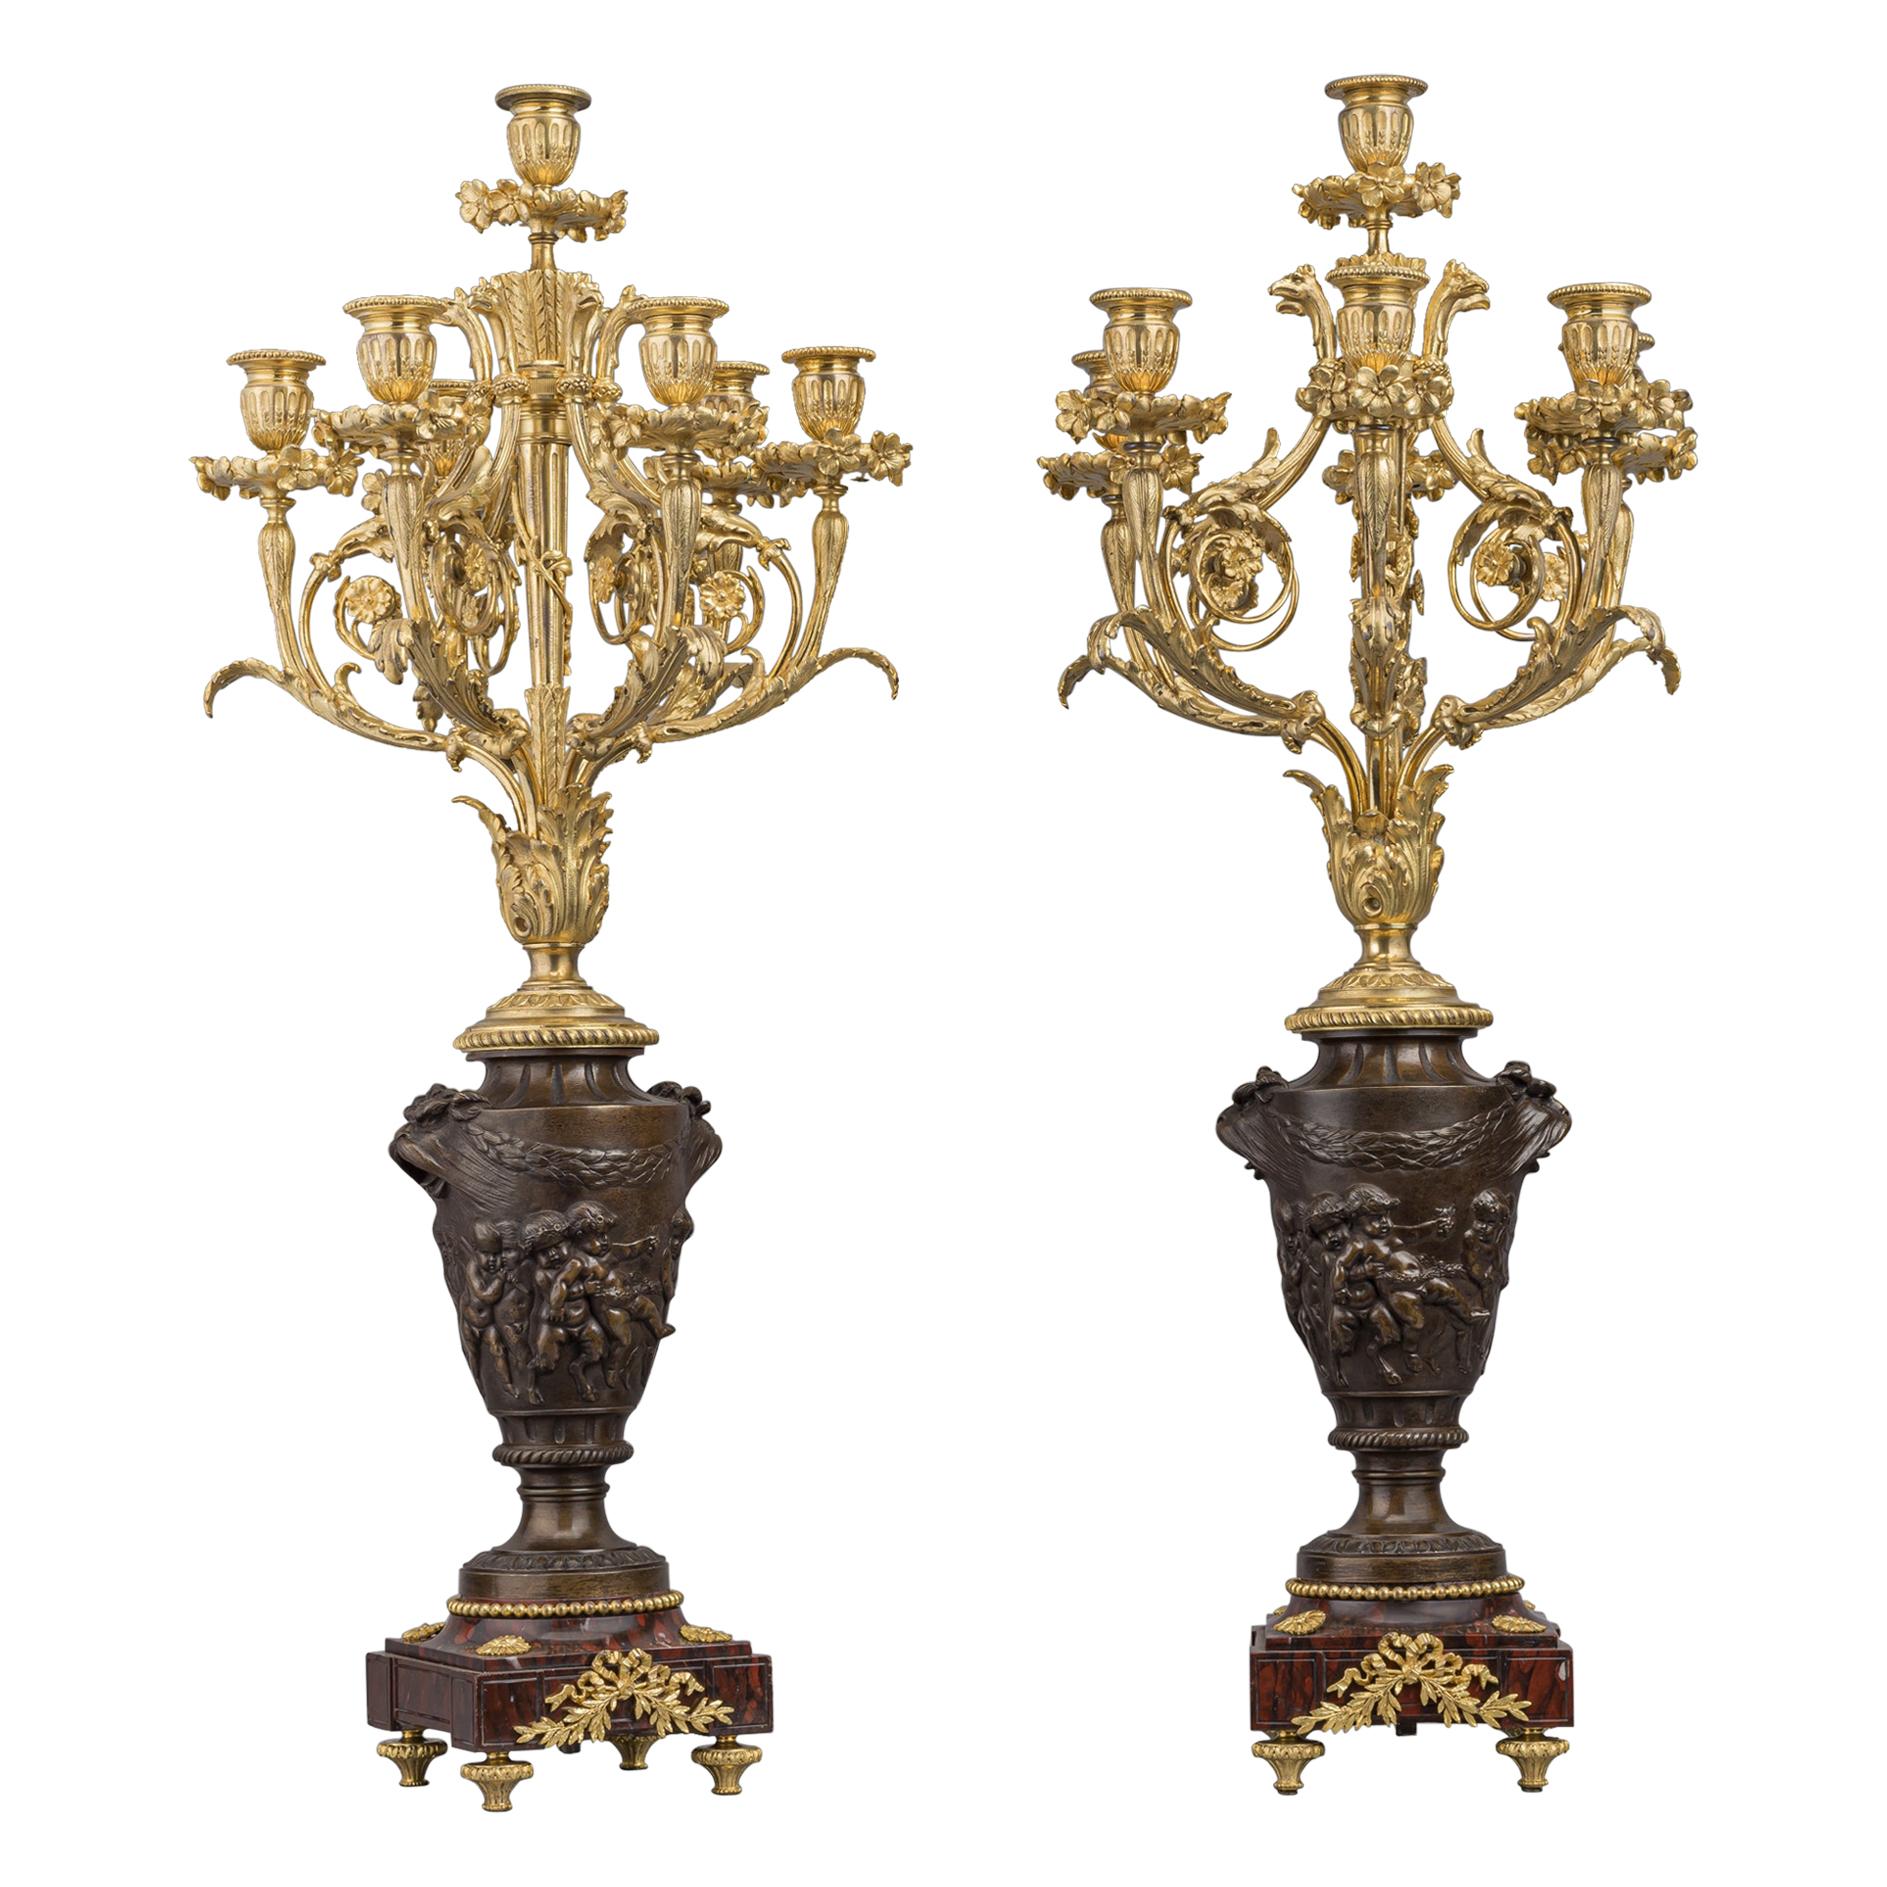 Bronze Seven-Light Candelabra After Clodion Cast, Suse Frères French circa 1890